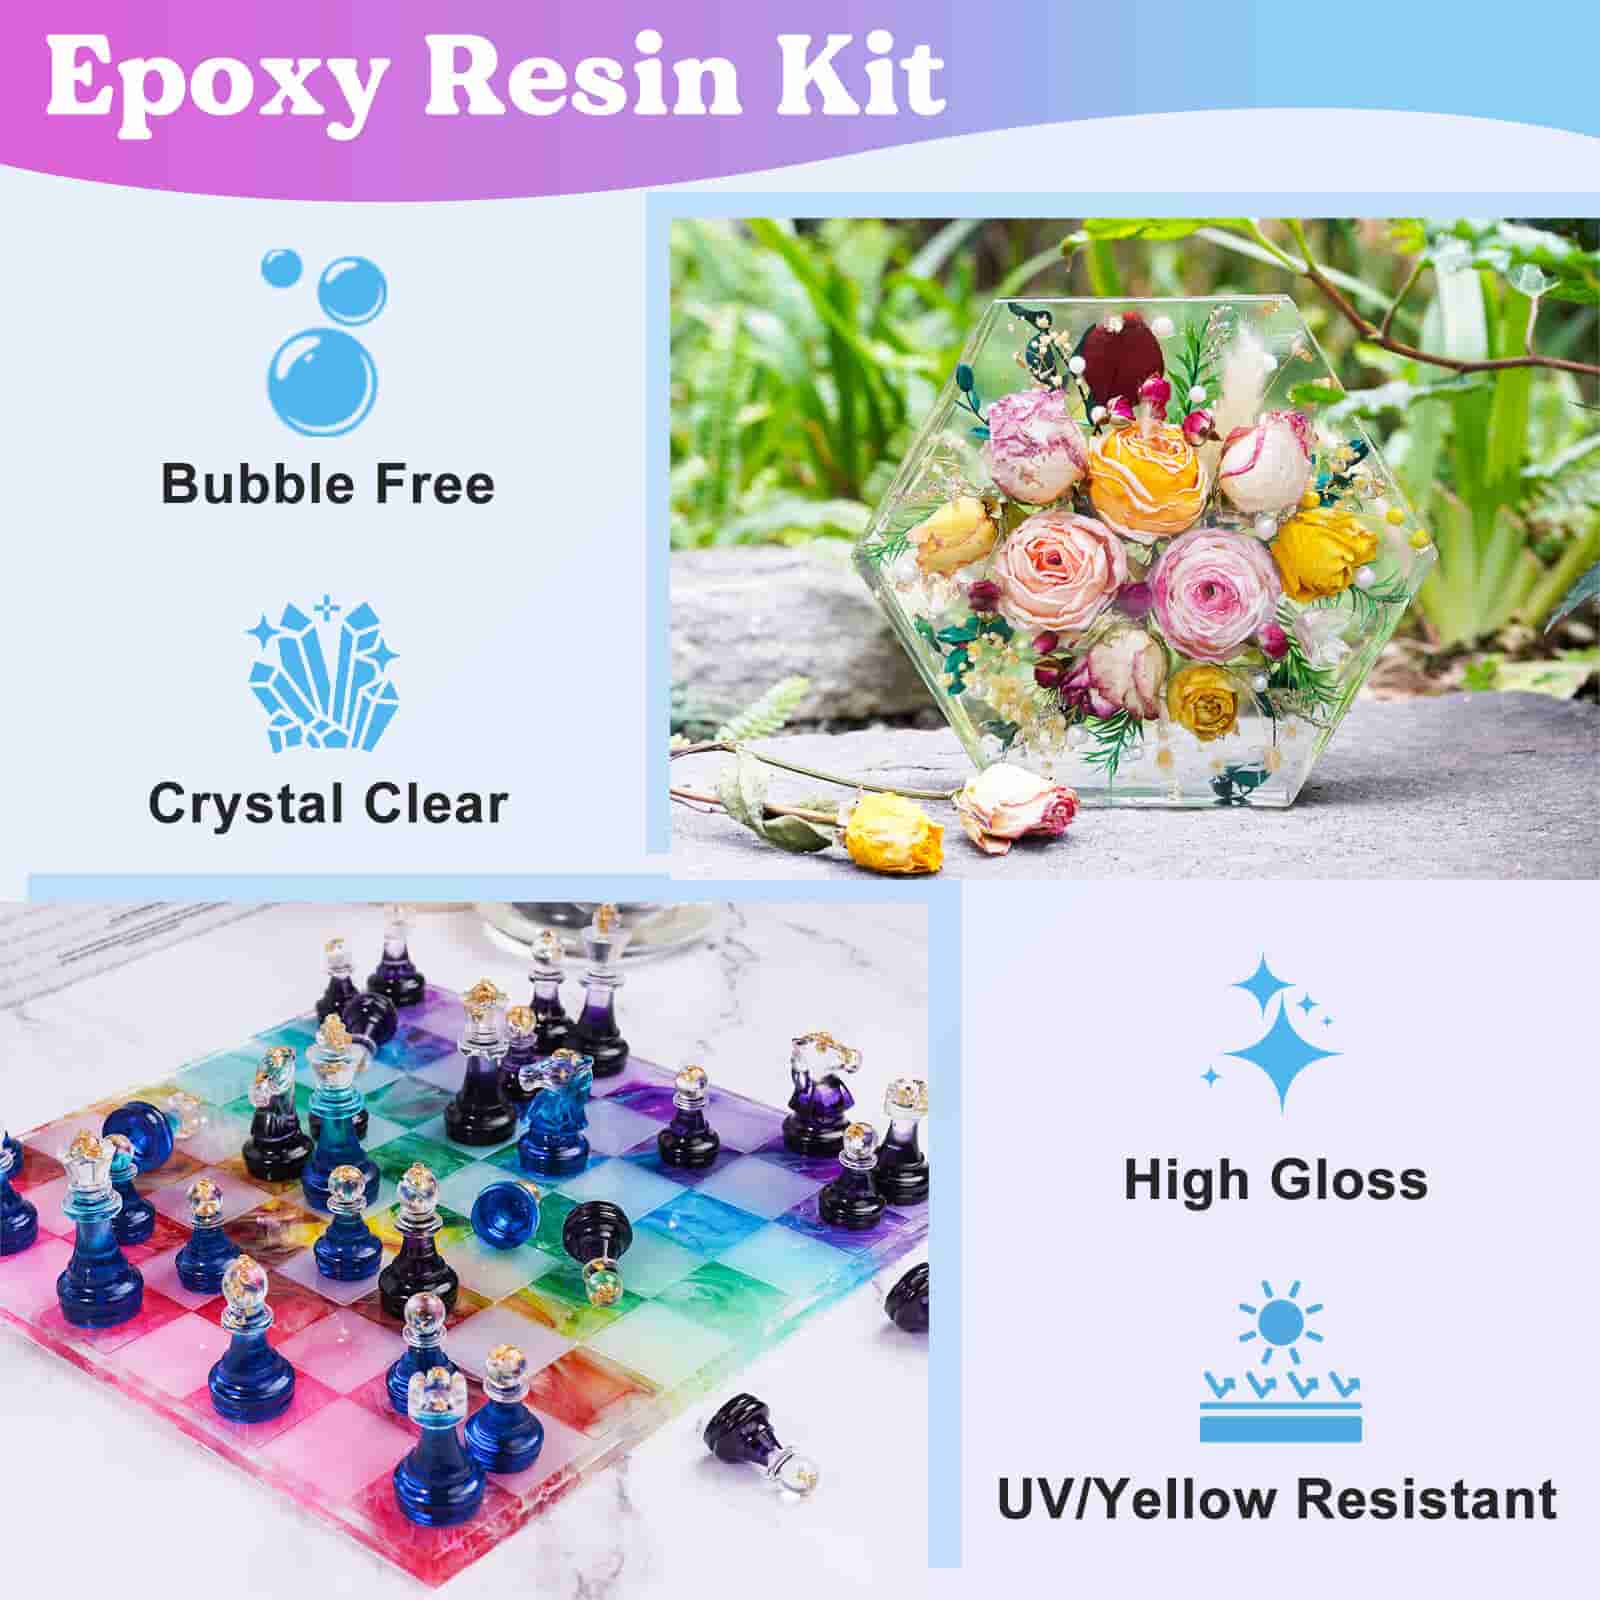 Epoxy Resin Art Resin Crystal Clear Formula - The Artist's Resin for  Coating Casting Resin Art Geodes River Tables Resin Jewelry- Non-Toxic (32  Oz Kit)